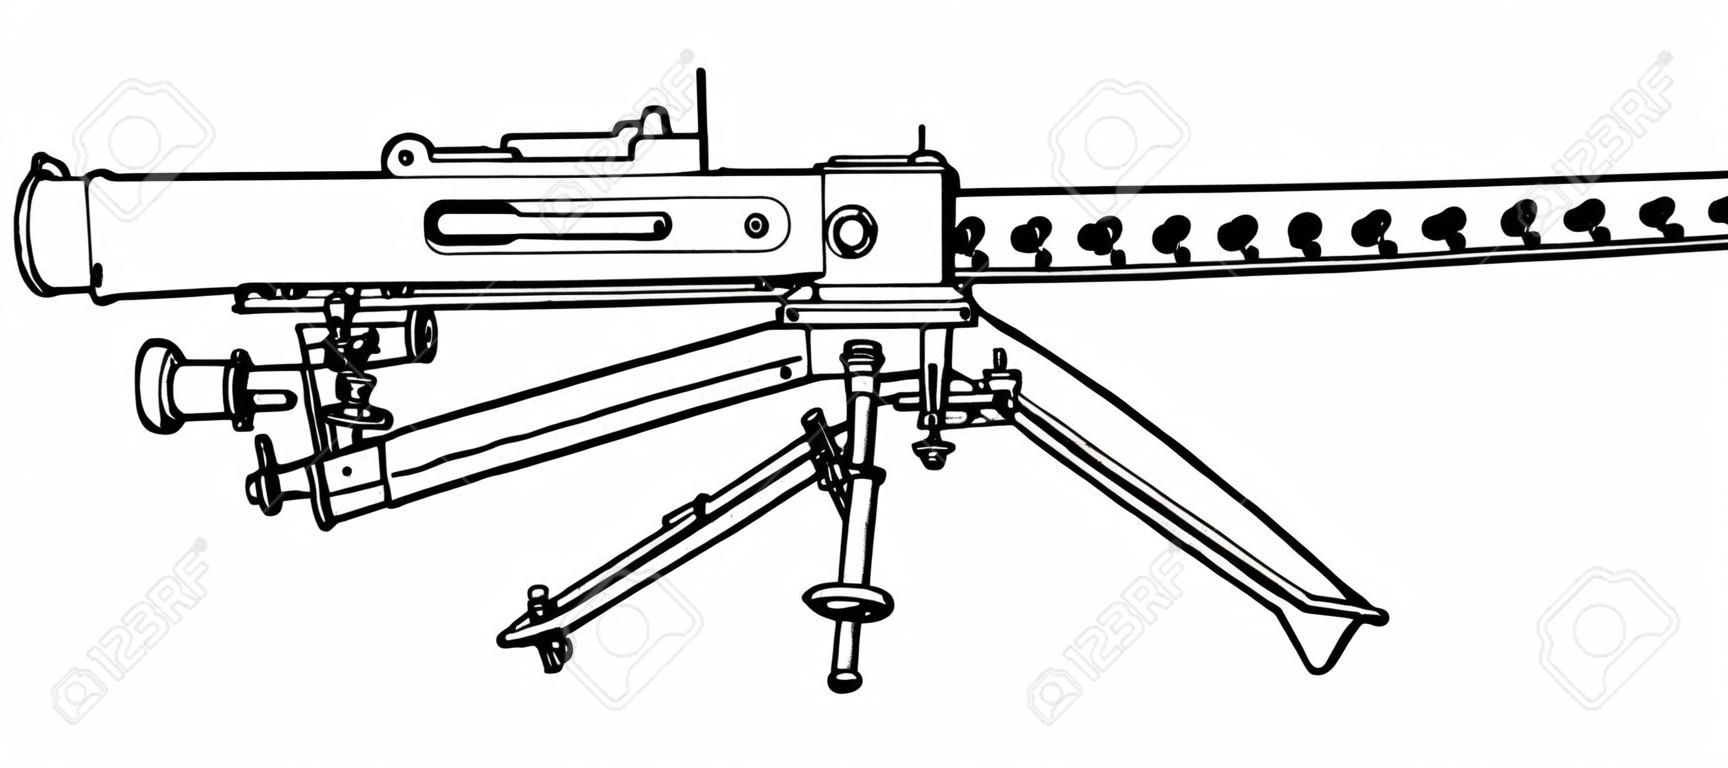 Browning Machine Gun was used as a light infantry, vintage line drawing or engraving illustration.